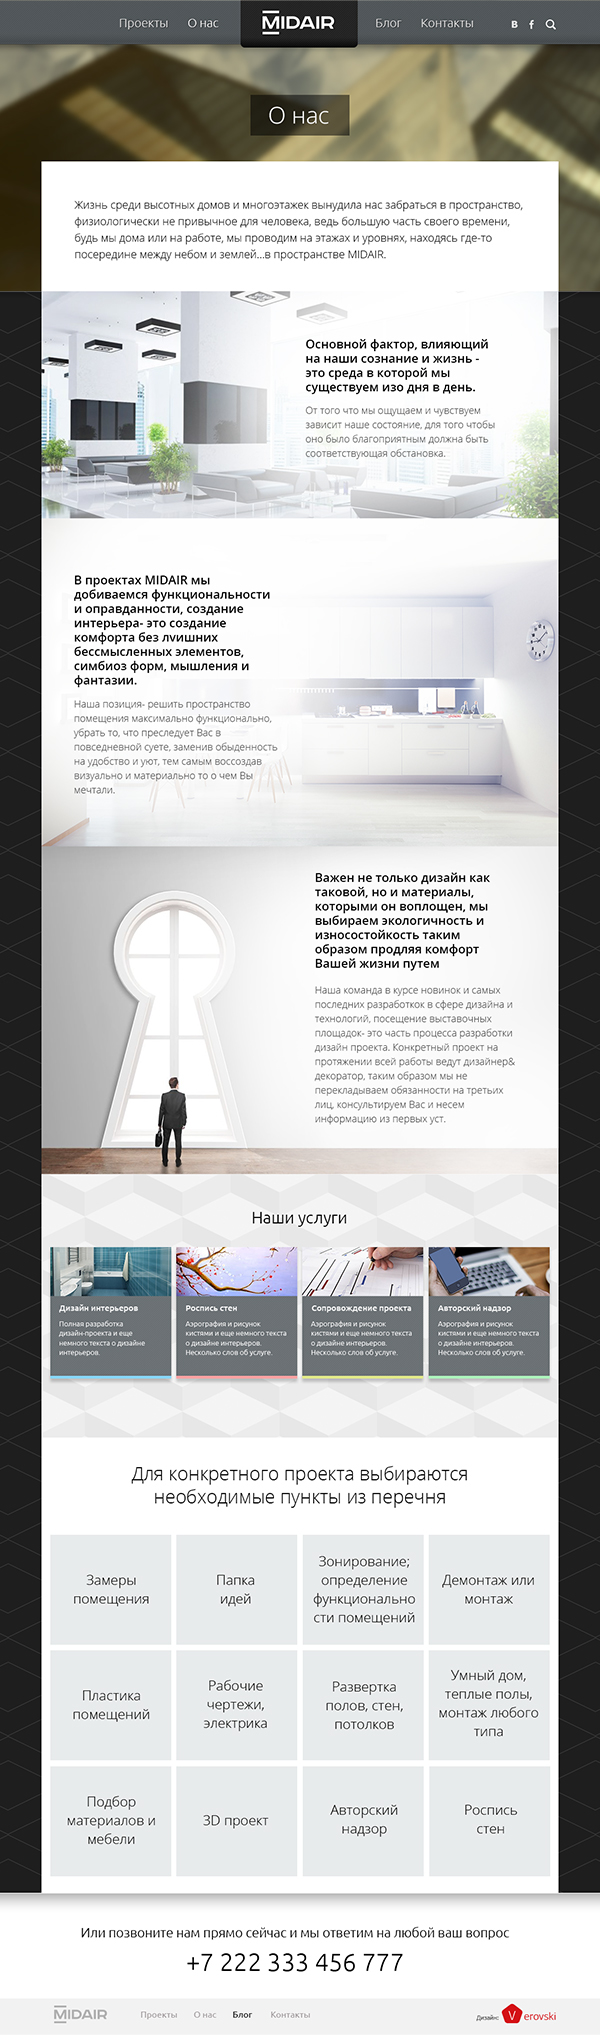 Web site architecture site Interior monuments design grey Style landing page gallery